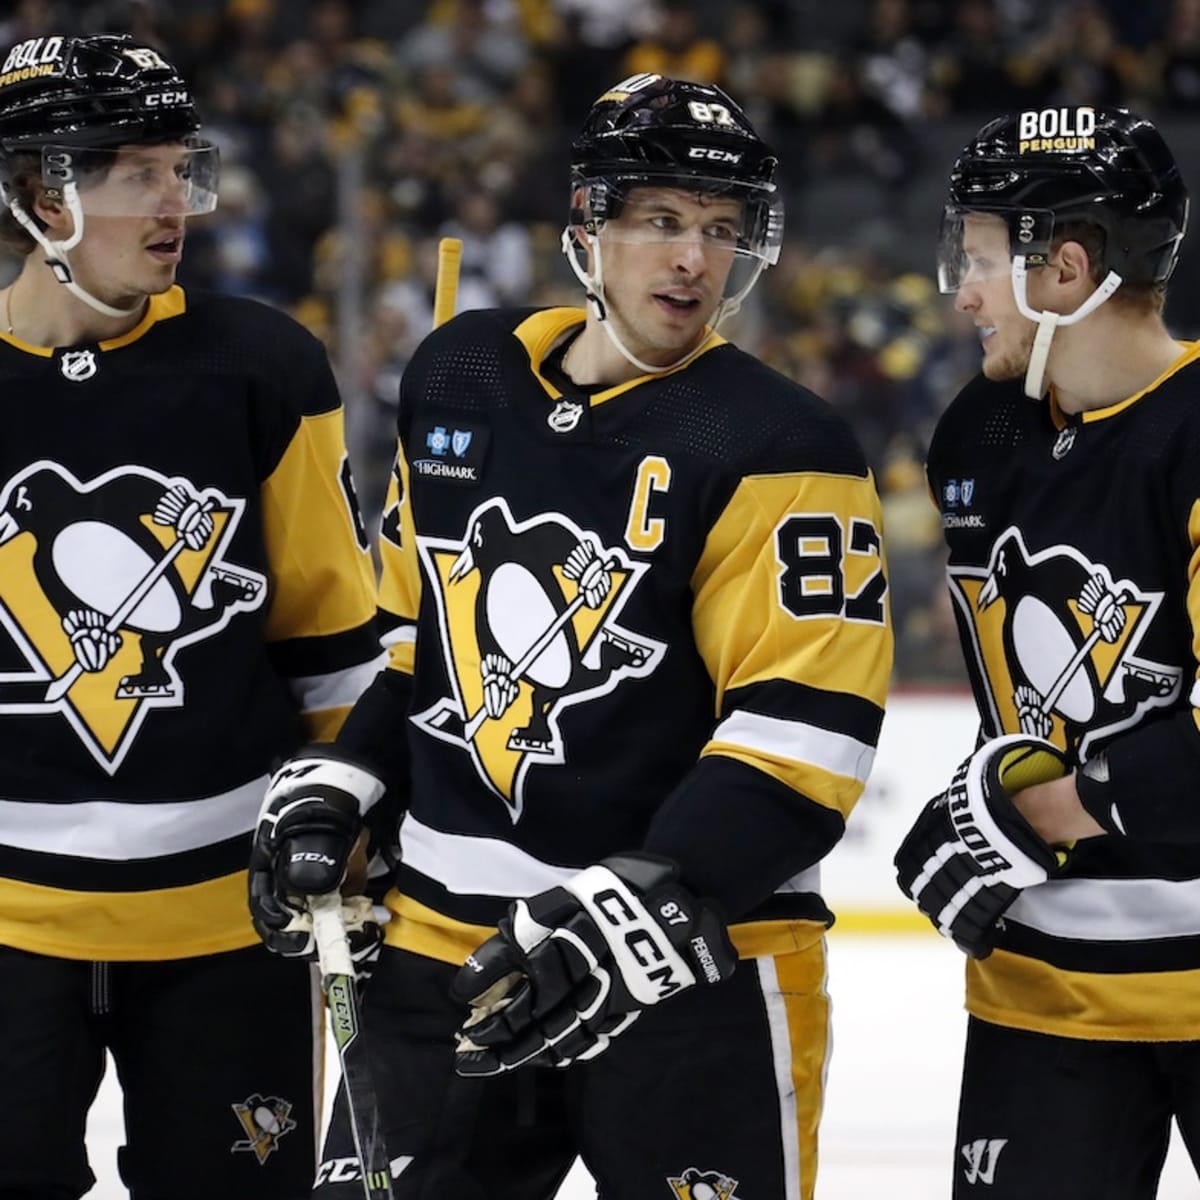 Pittsburgh Penguins Daily: Stanley Cup Banner, Opening Night & More